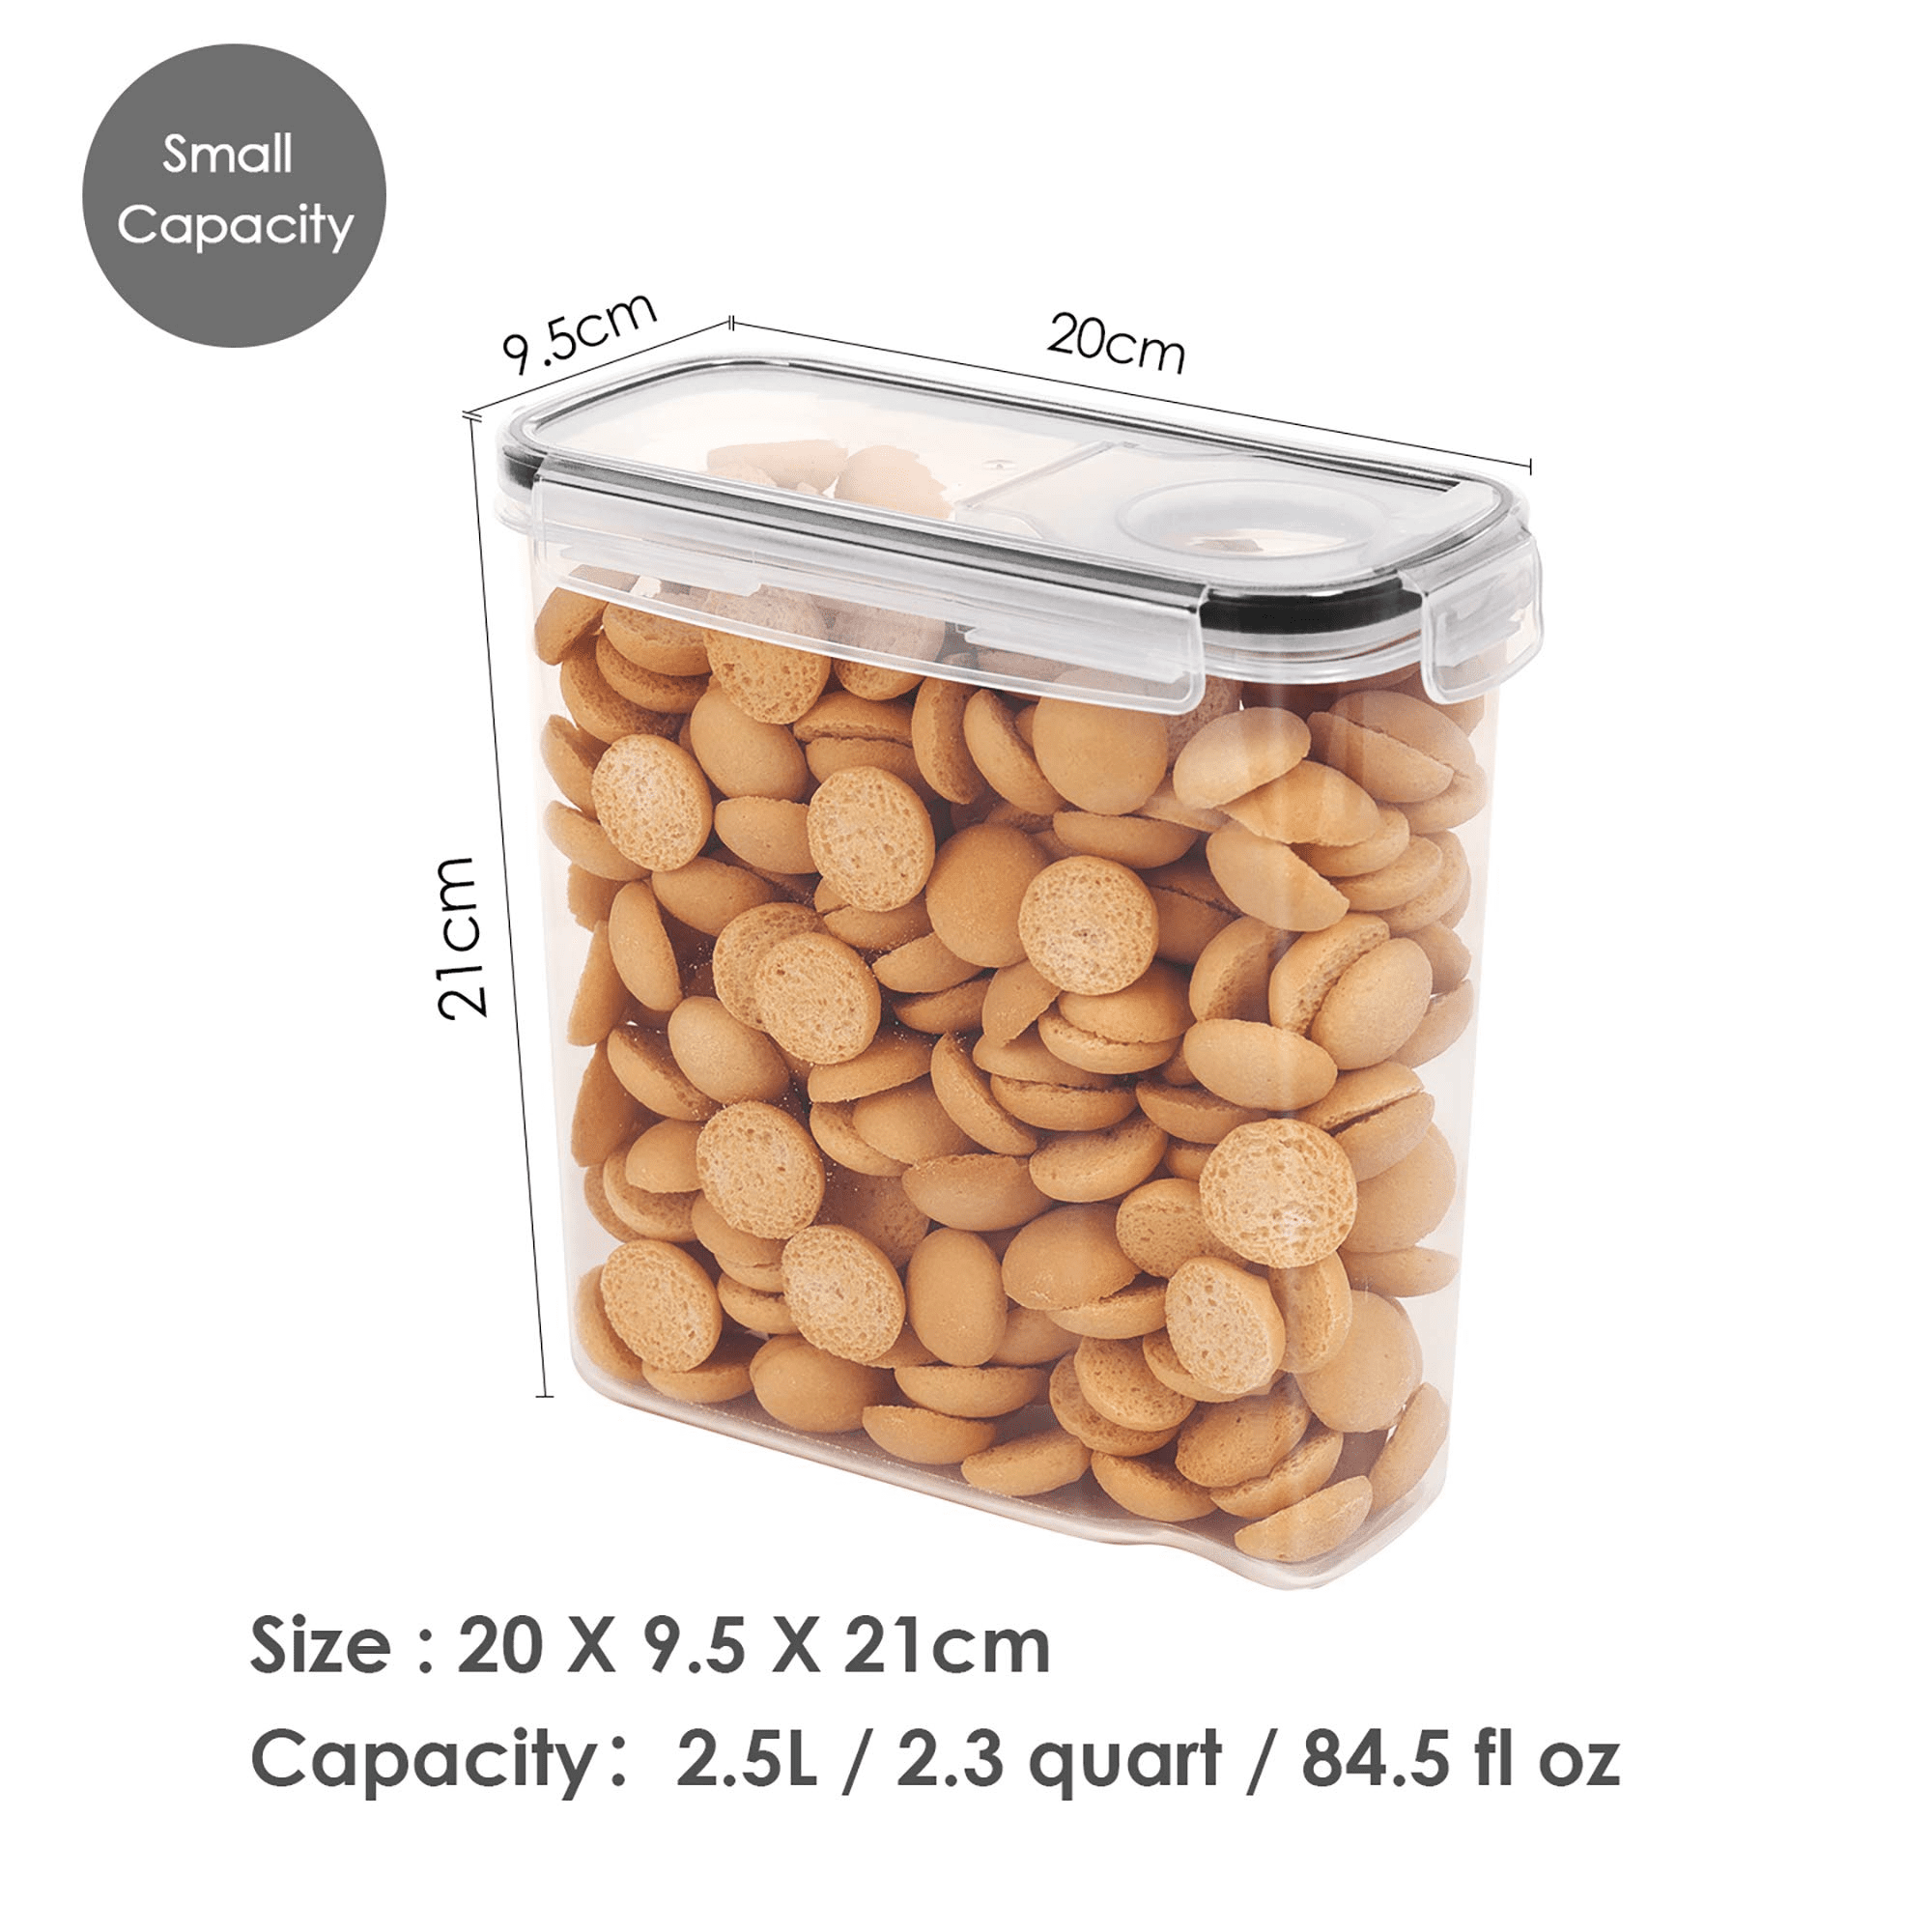 Venoly Dry Food Storage Containers with Lids (4 Piece Set